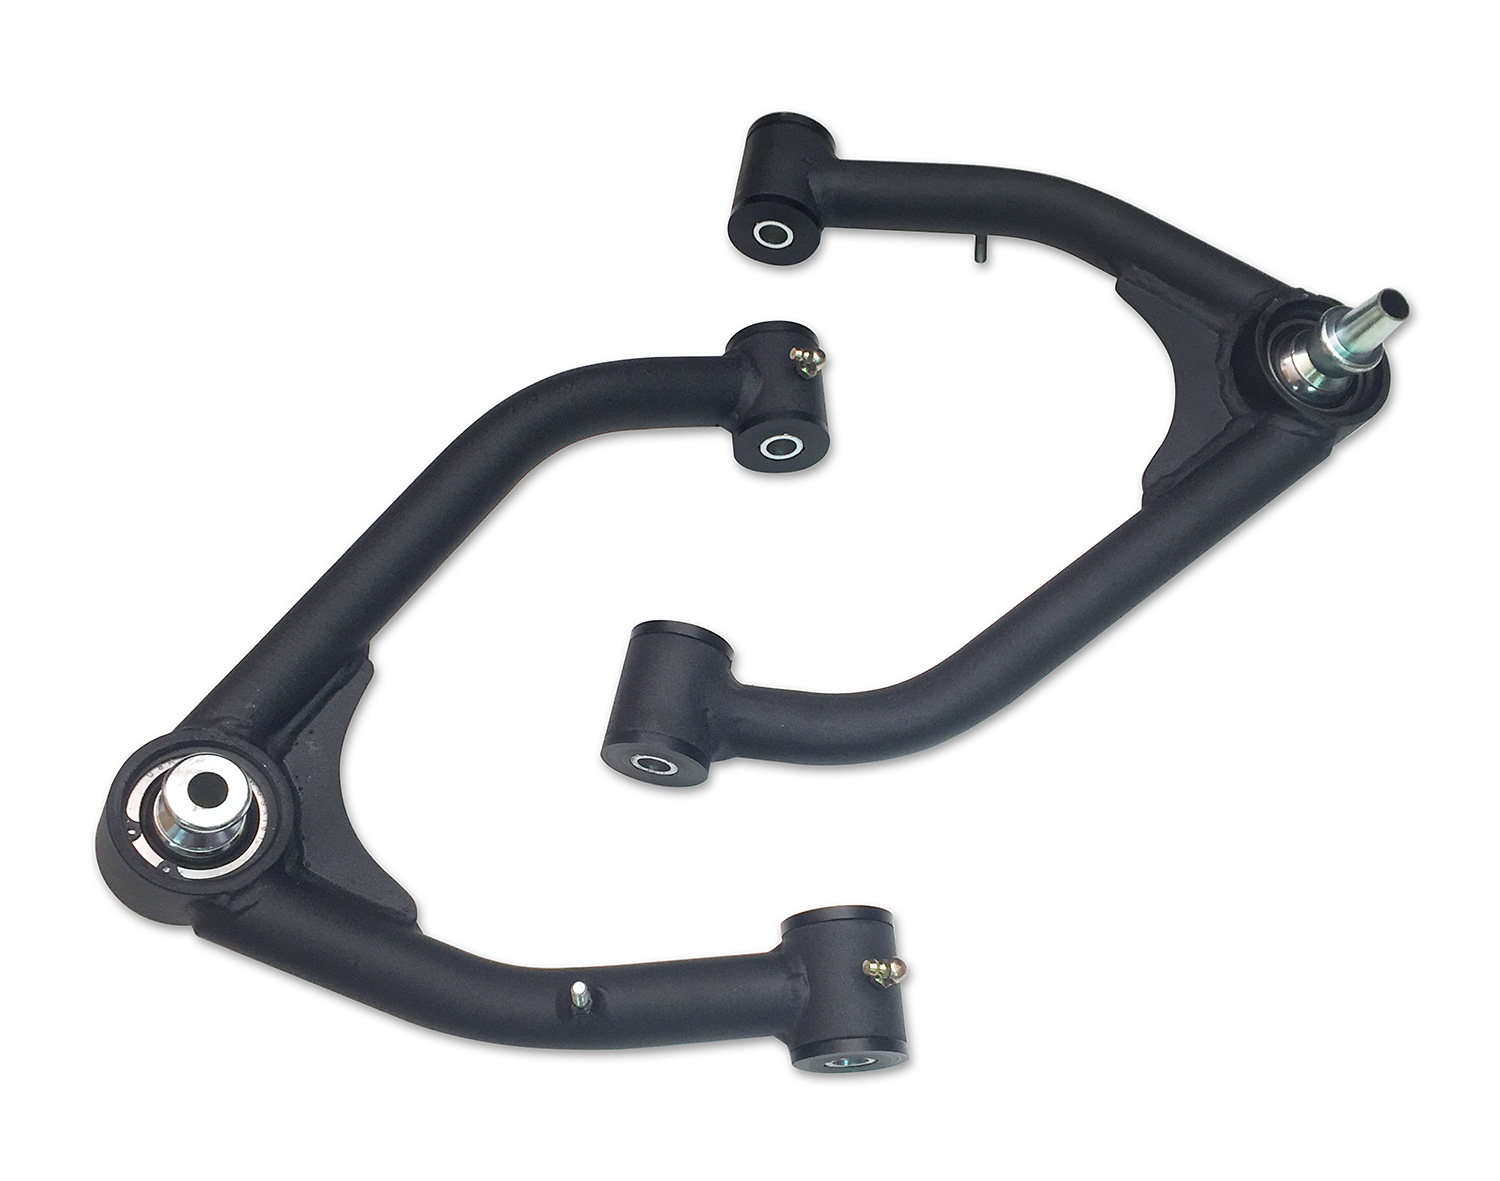 Uni-Ball Upper Control Arms 14-18 Chevy Silverado/Suburban/Tahoe and Sierra/Yukon/Yukon XL 1500 4x4 & 2WD With Aluminum OE Upper Control Arms or Stamped Two Piece Steel Arms Pair Tuff Country